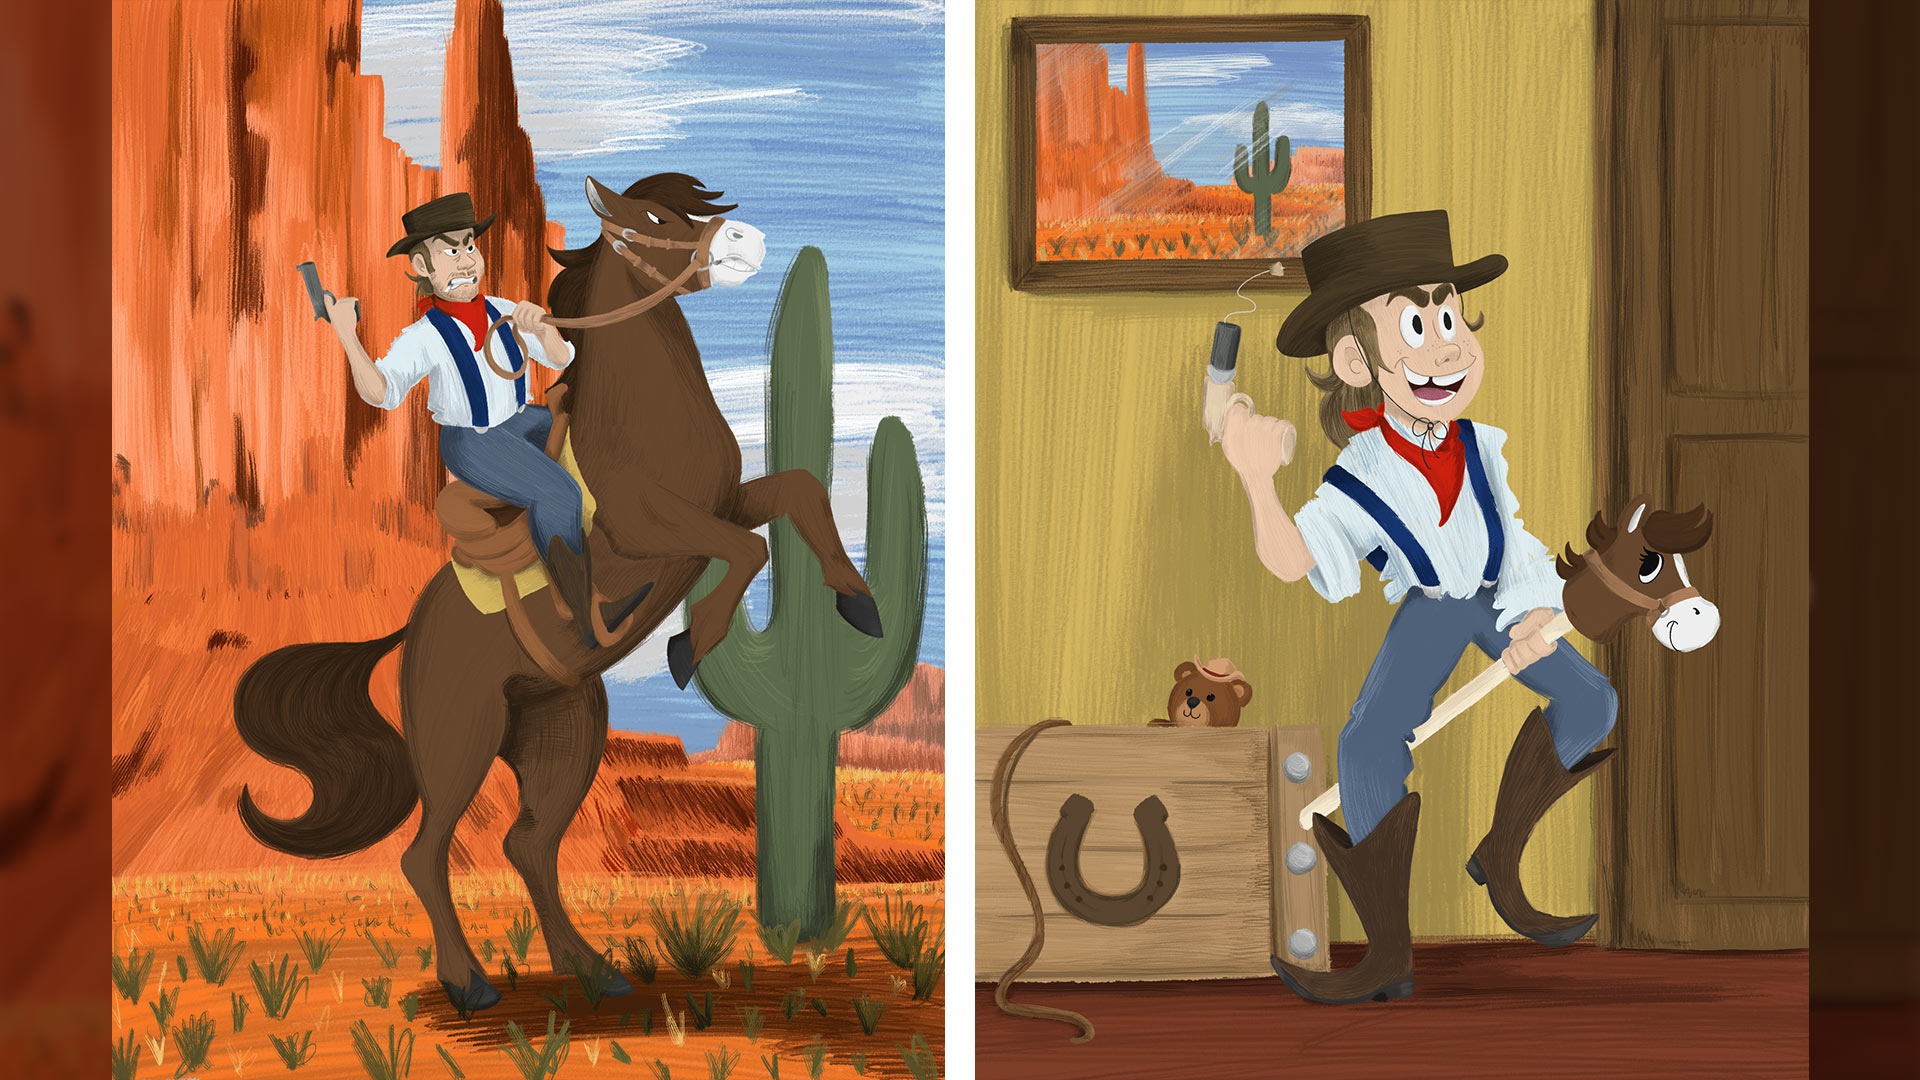 On the left is an illustration of an outlaw on a rearing horse. He is in the desert and holding his gun up. On the right is a piece mirroring the left. A child dressed in western wear that is too big for him is holding up a freshly discharged cork gun as he rides a toy pony.